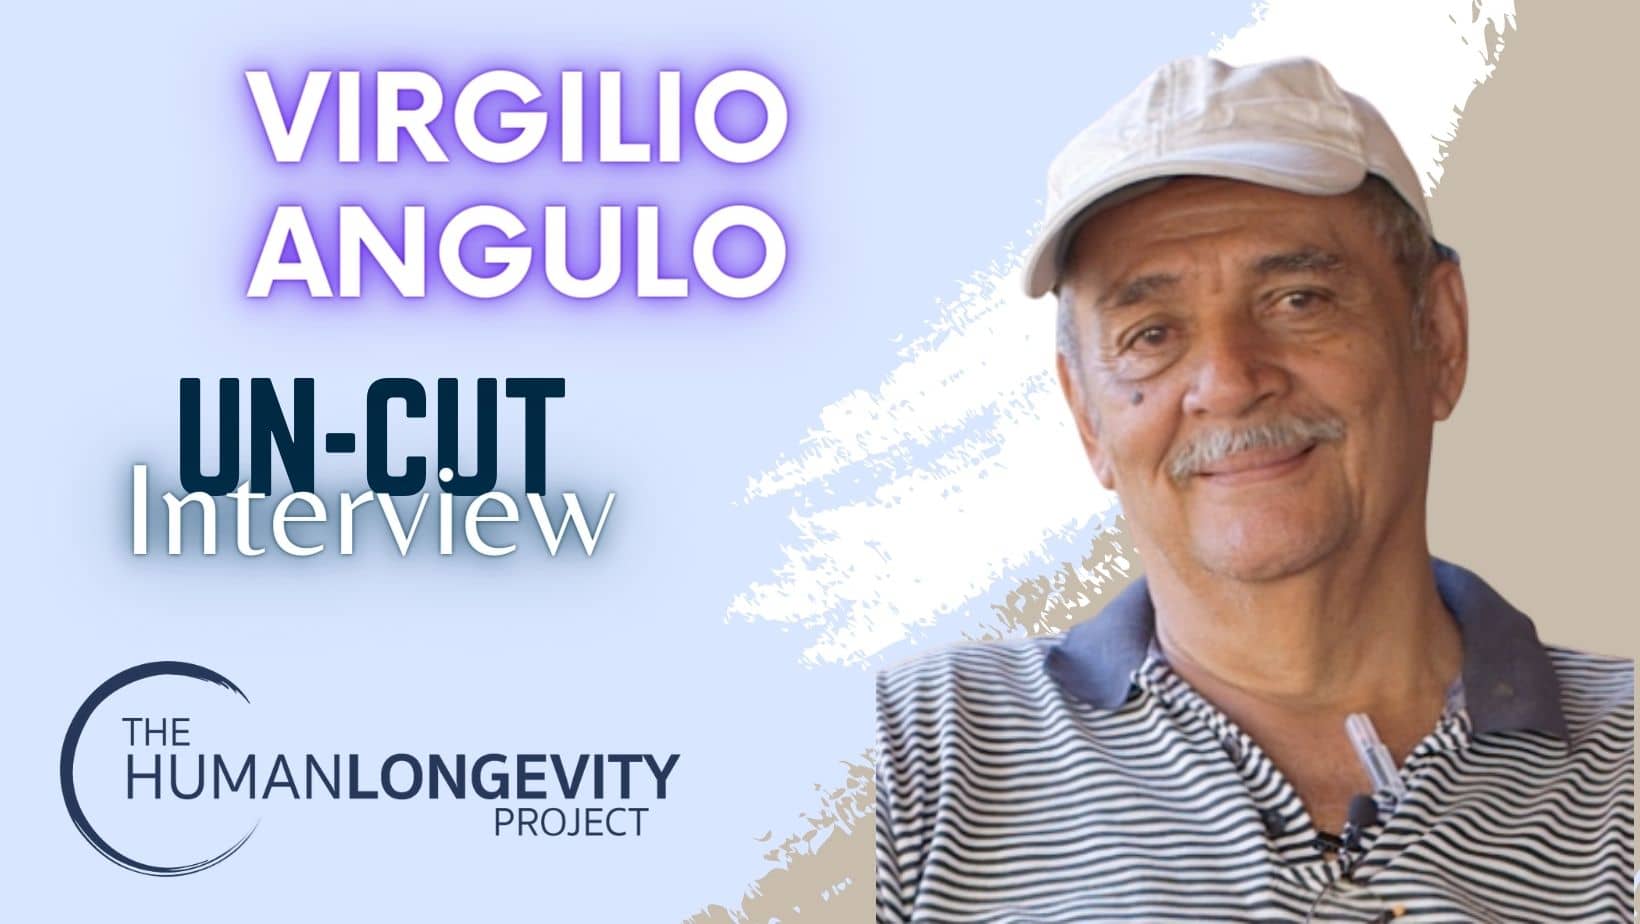 Human Longevity Project Uncut Interview With Virgilio Angulo